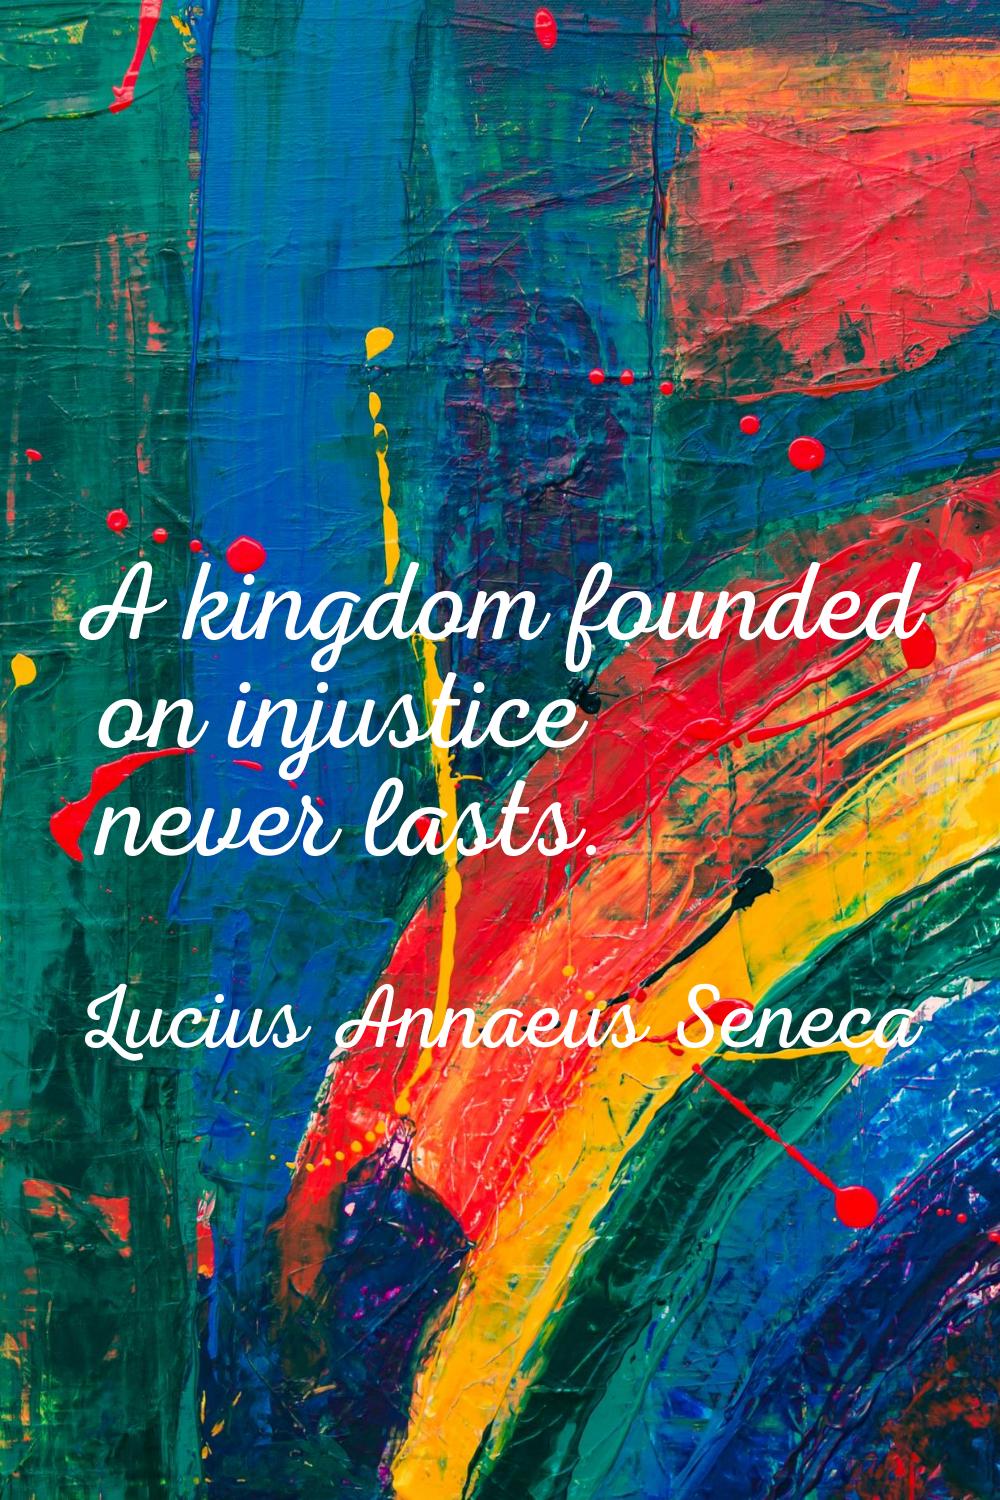 A kingdom founded on injustice never lasts.